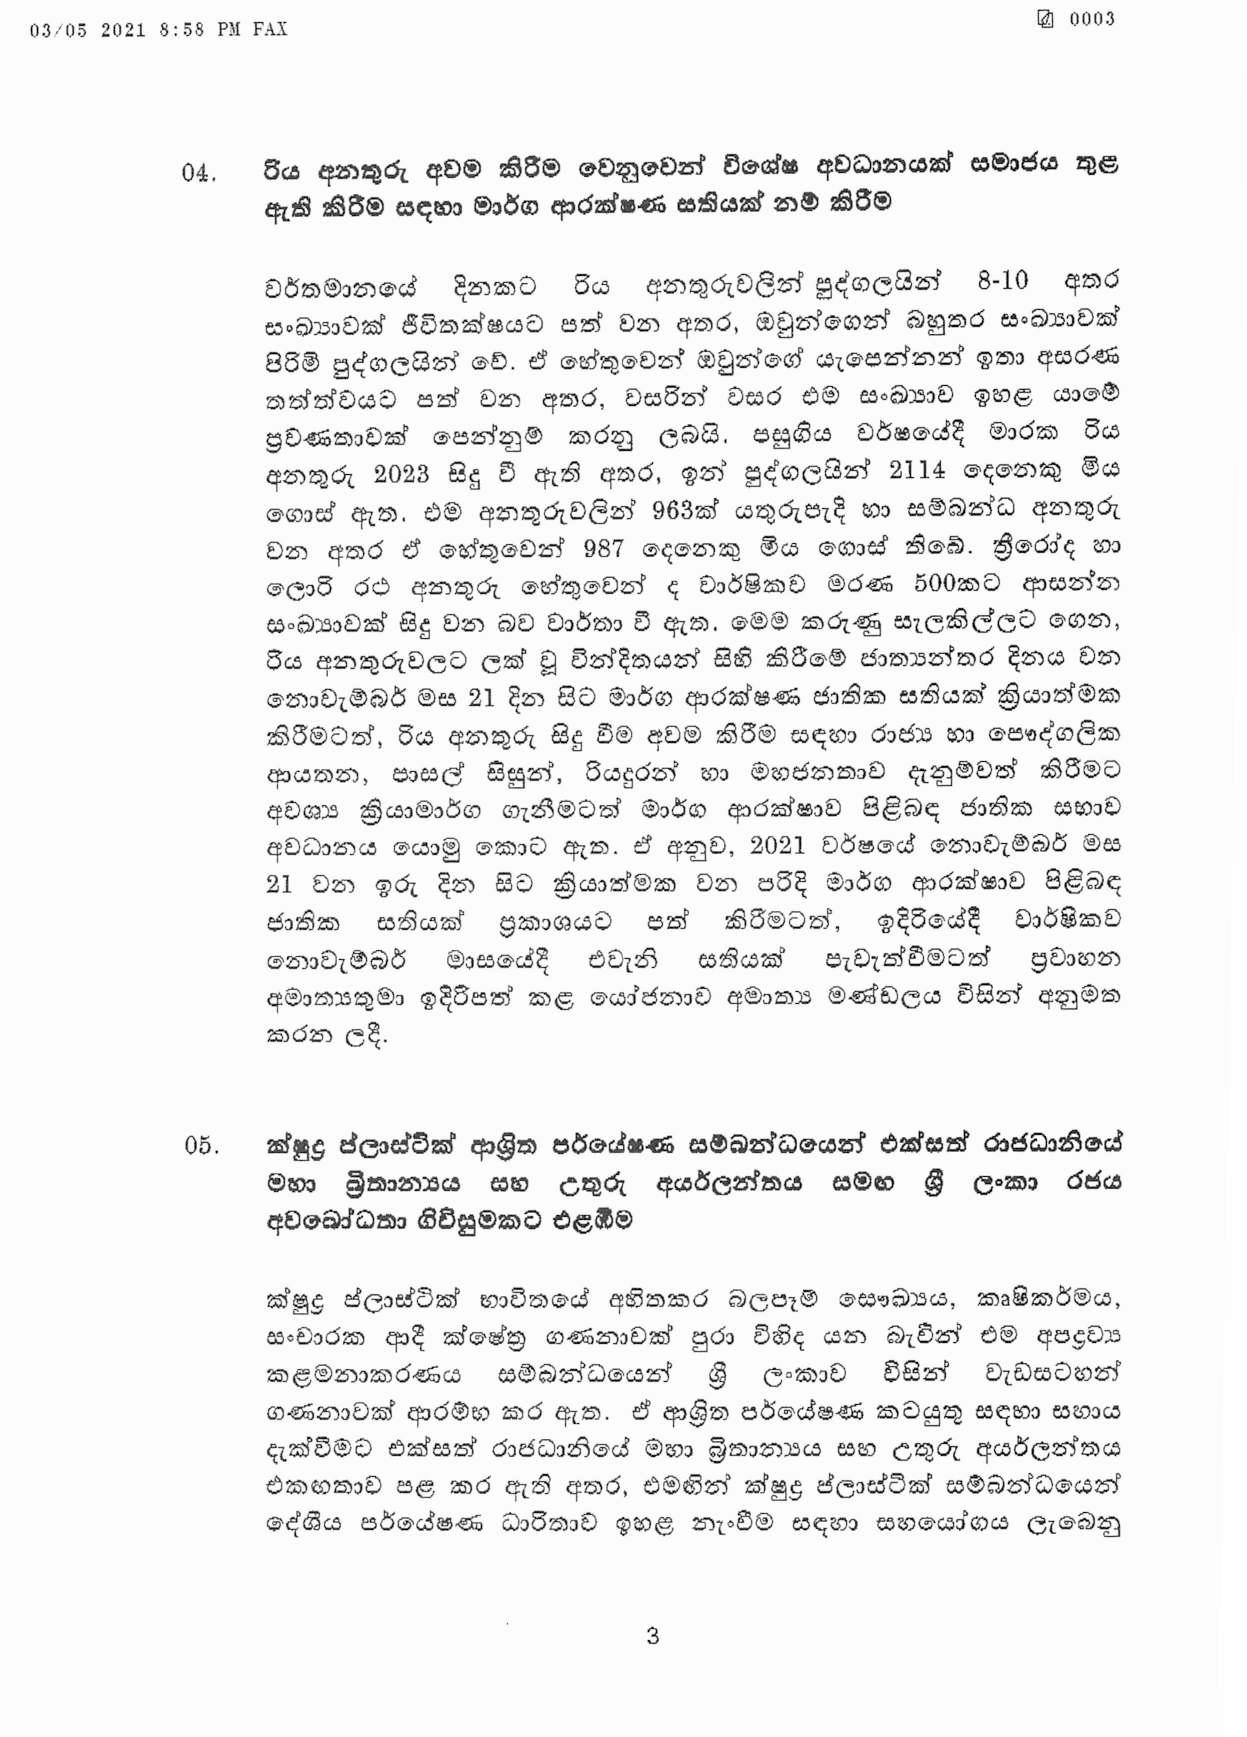 Cabinet Decision on 03.05.2021Sinhala page 003